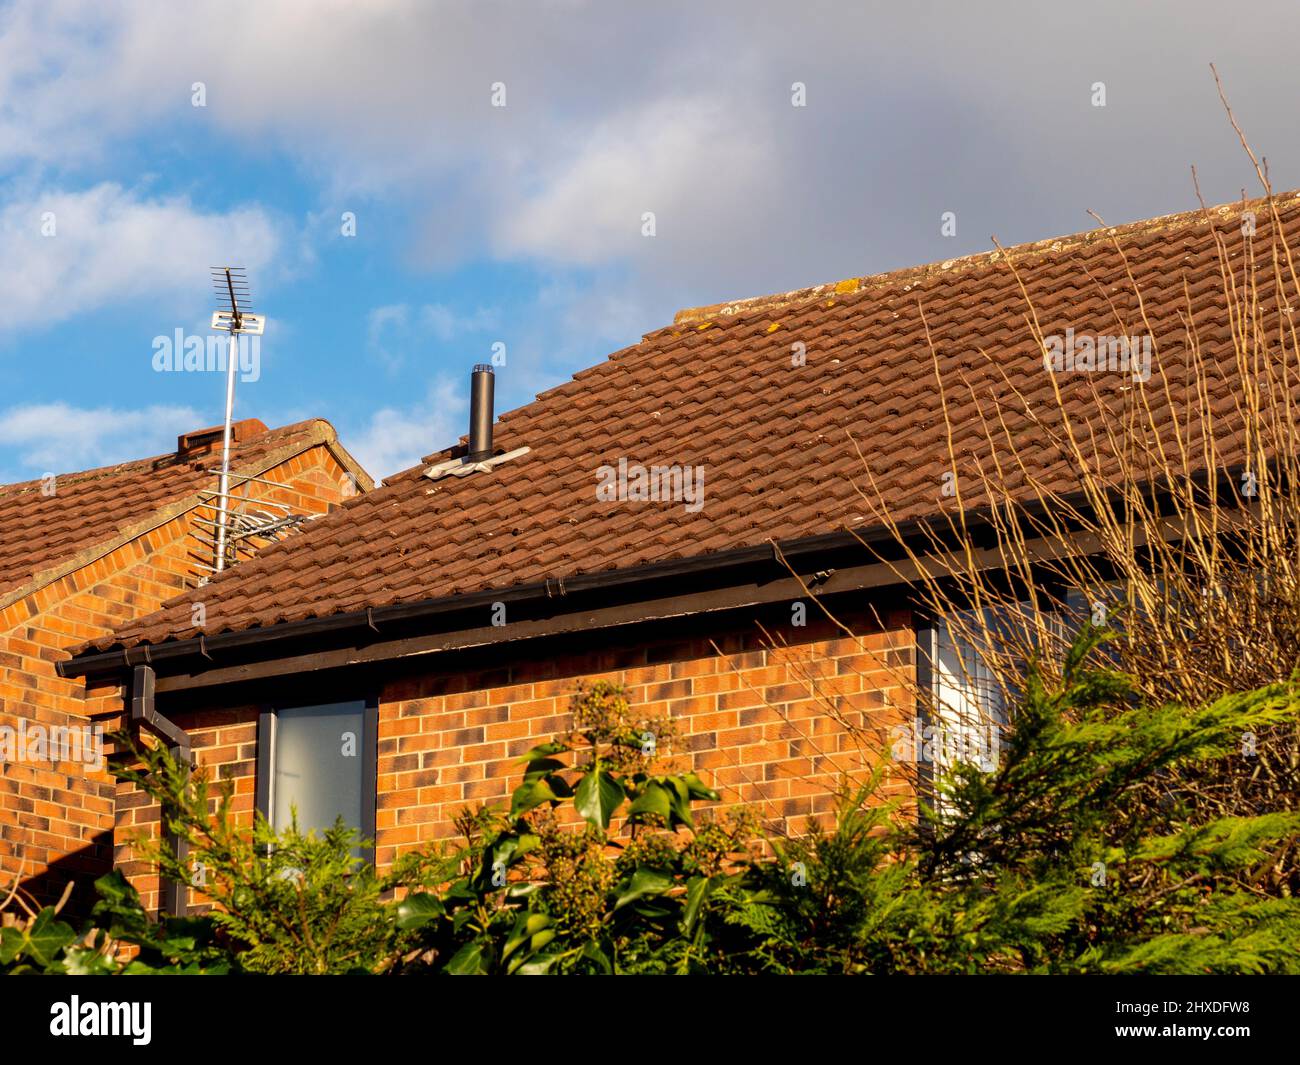 Typical domestic tiled house roof with Vent pipe protruding through tiles. Stock Photo